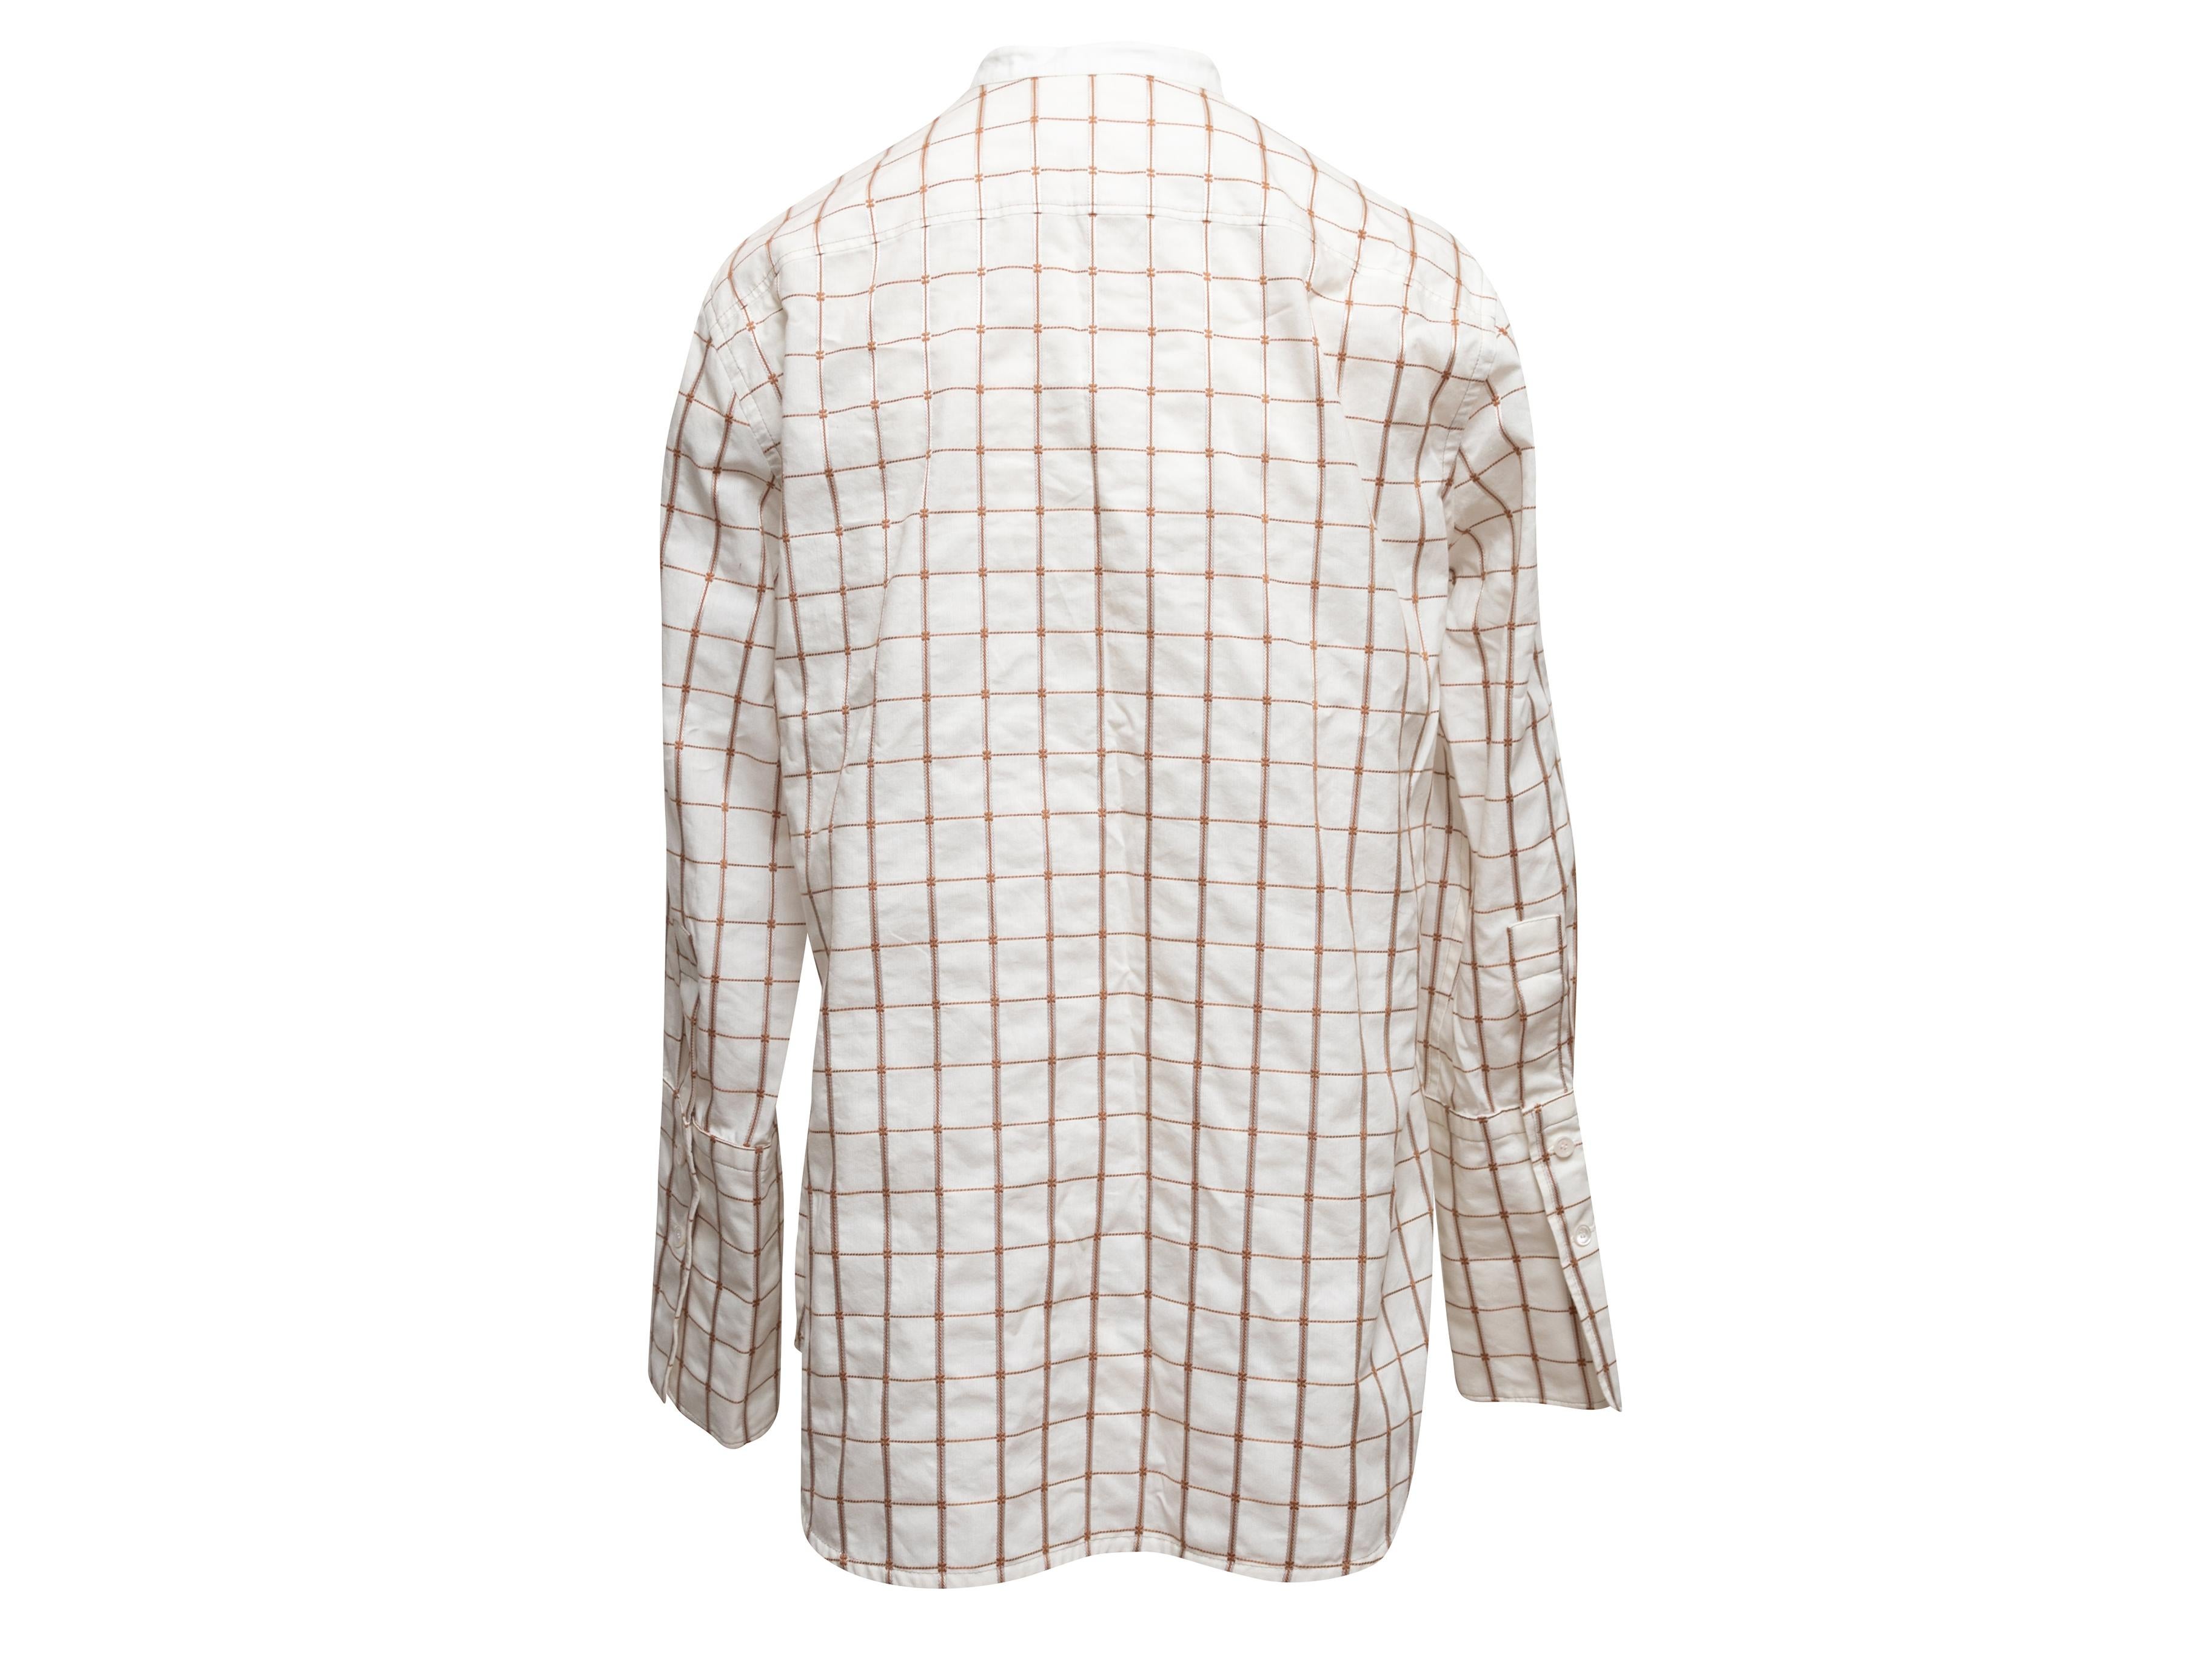 White & Gold Chloe Grid Print Button-Up Top Size FR 40 In Good Condition For Sale In New York, NY